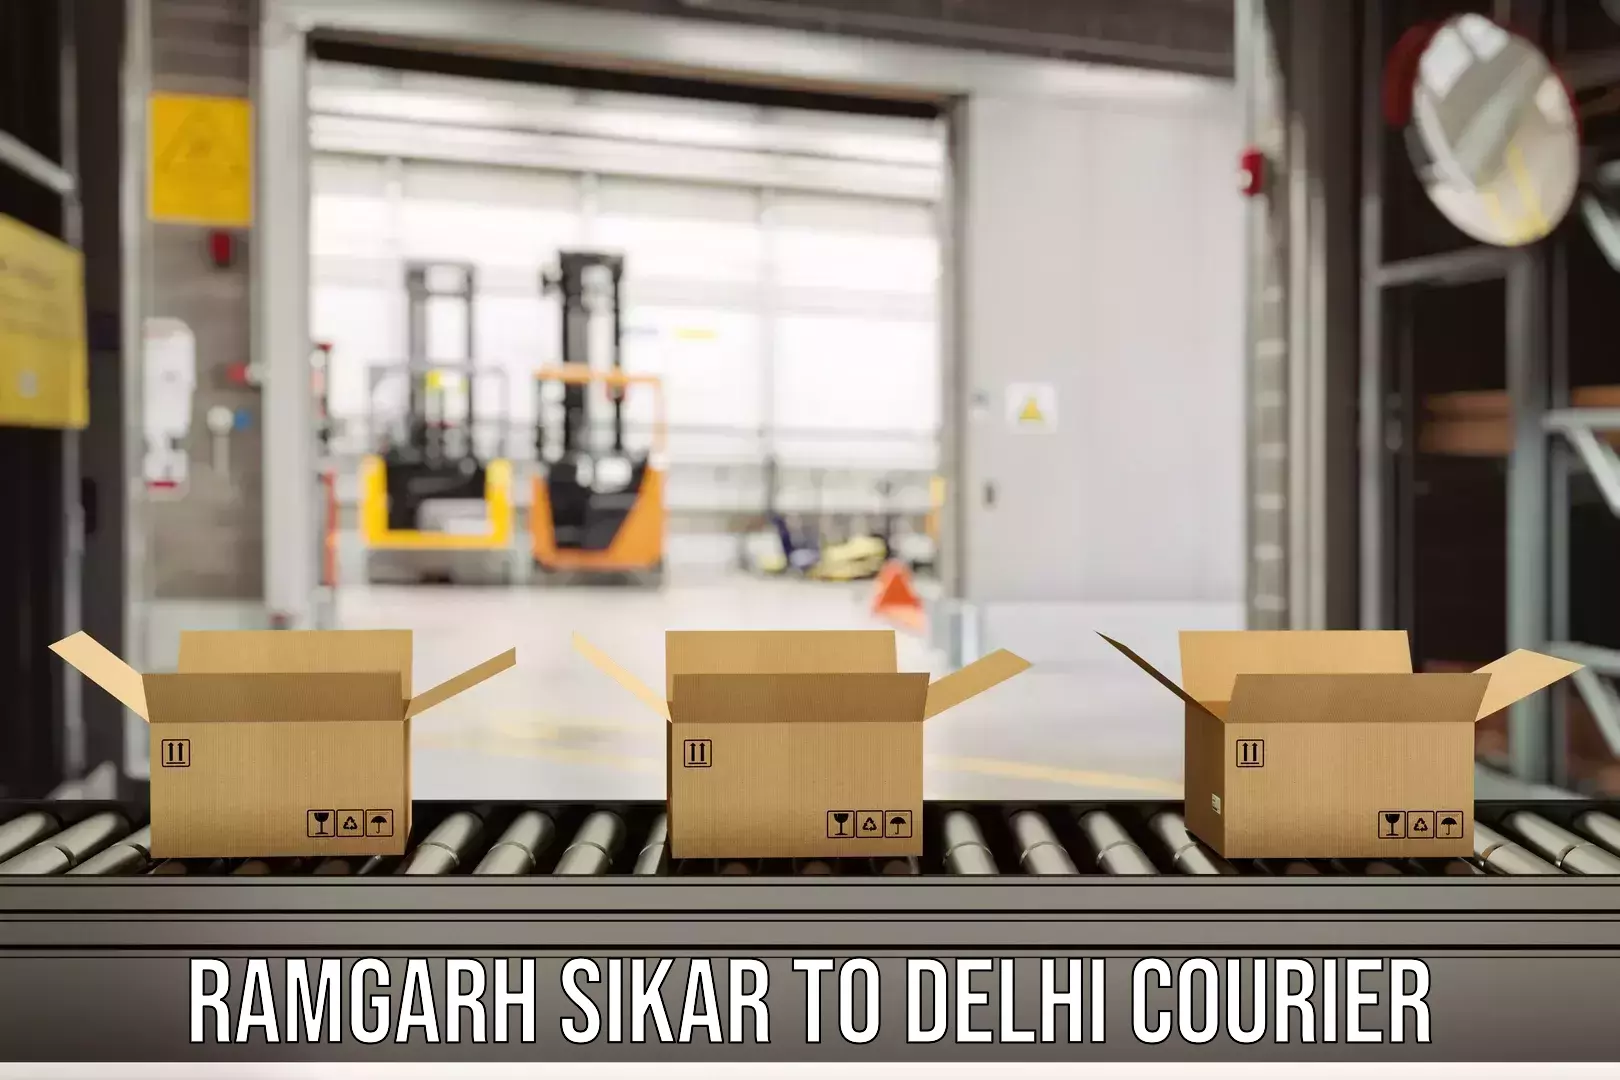 Multi-city courier Ramgarh Sikar to NCR